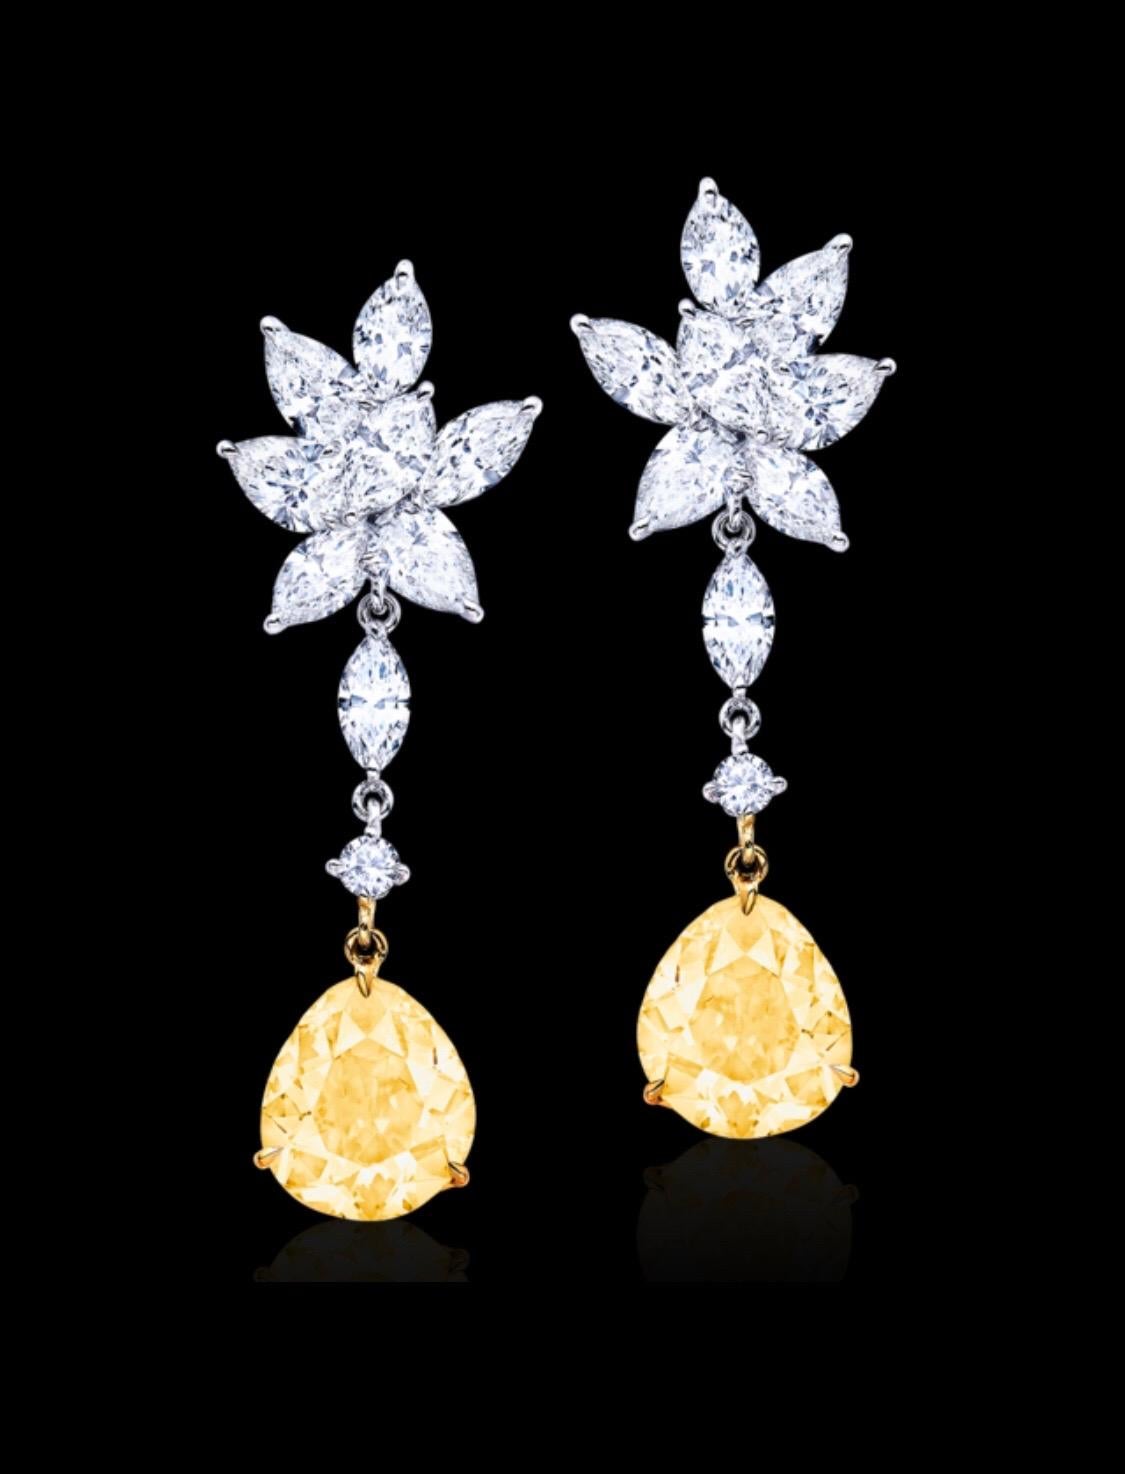 Showcasing a pair of gorgeous fancy yellow pear shapes weighing 4.50ct certified by GIA. Hand made in the Emilio Jewelry Atelier, whom specializes in rare collectible pieces in the Natural ultra rare fancy colored Diamond sector.
Please inquire for